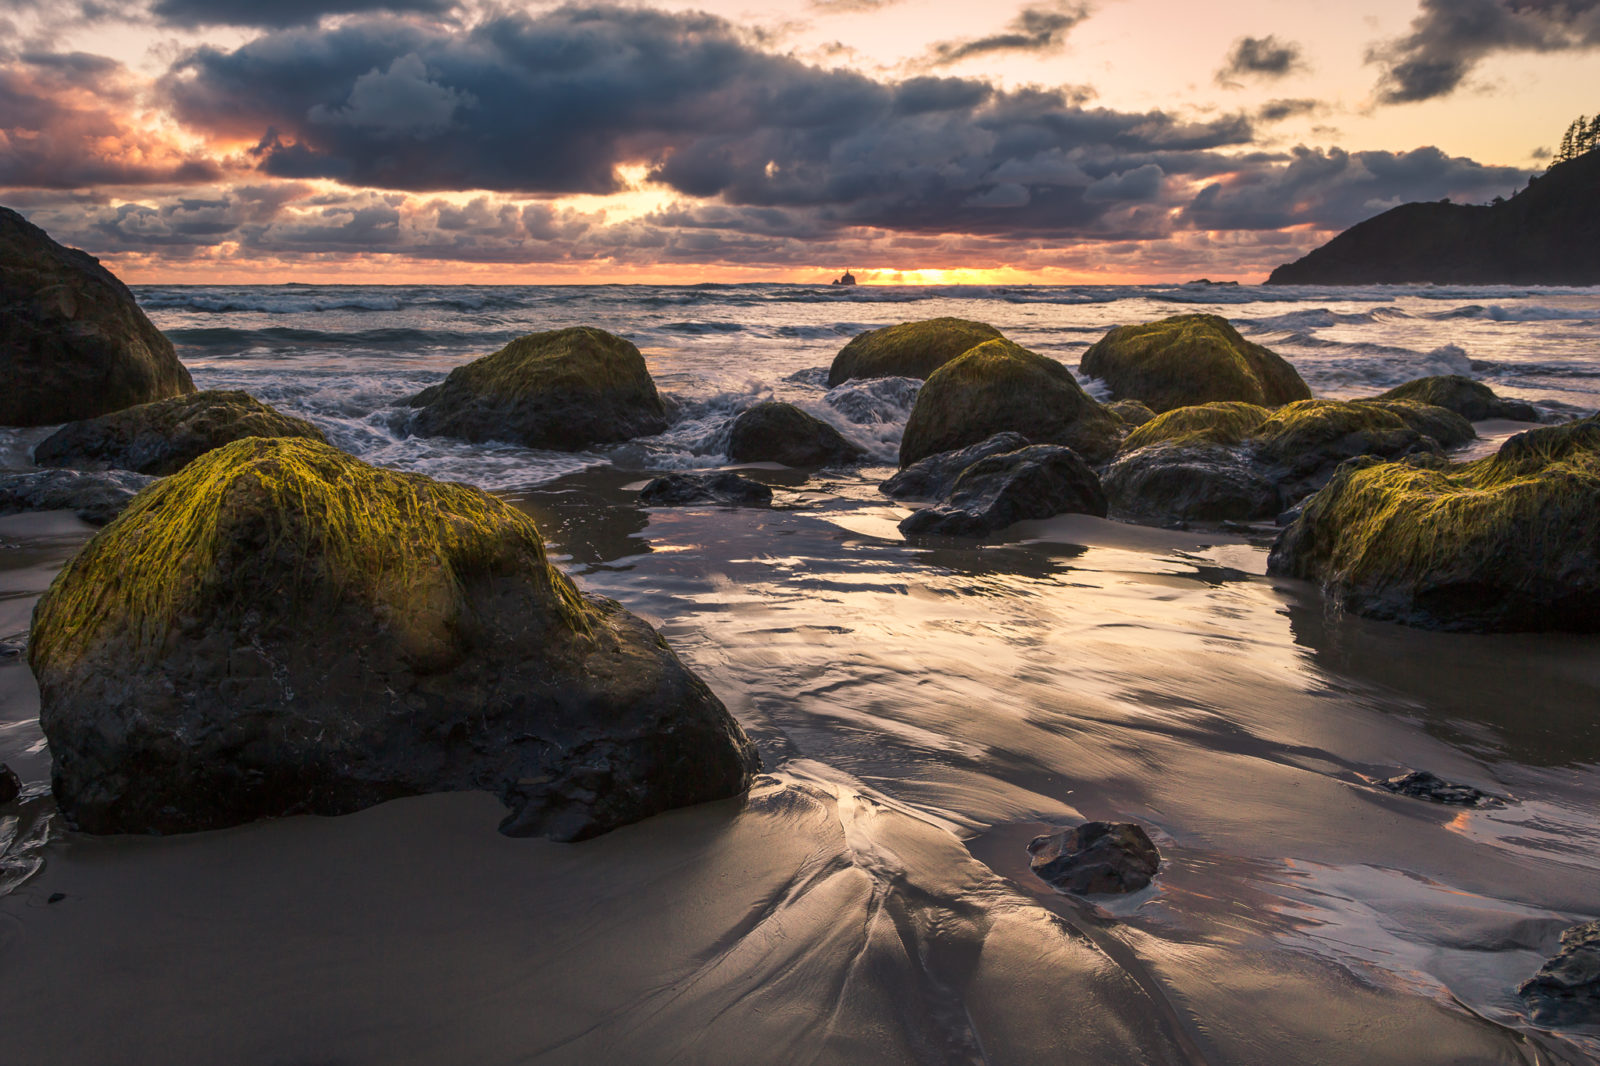 Today’s Photo Of The Day is “Ecola State Beach” by Nadeen Flynn. Location: Ecola State Beach, Oregon.